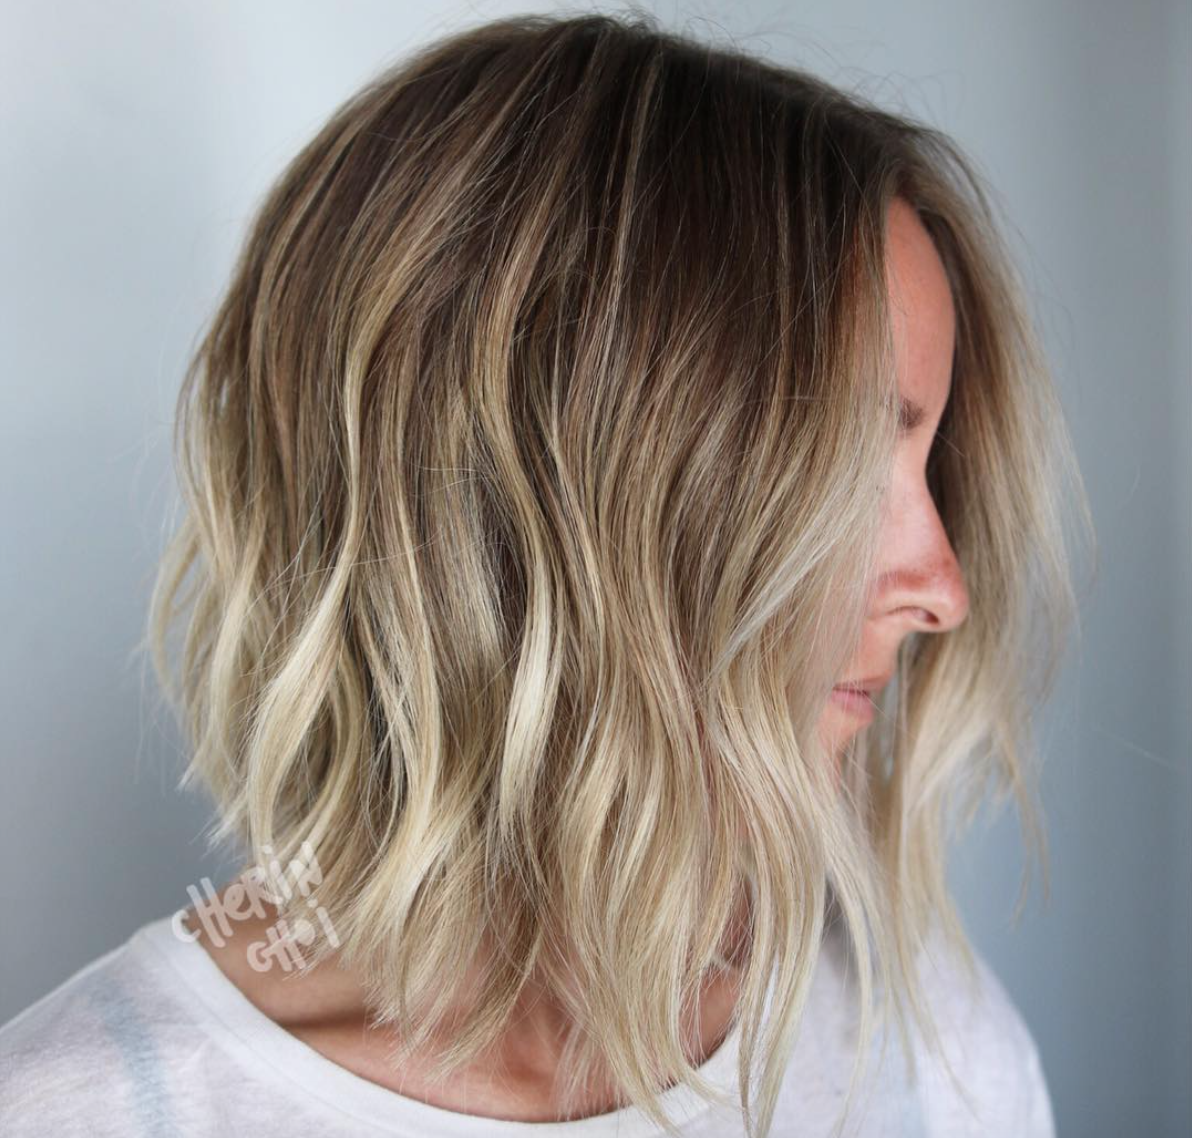 10 Short Ombre Hairstyles We Love